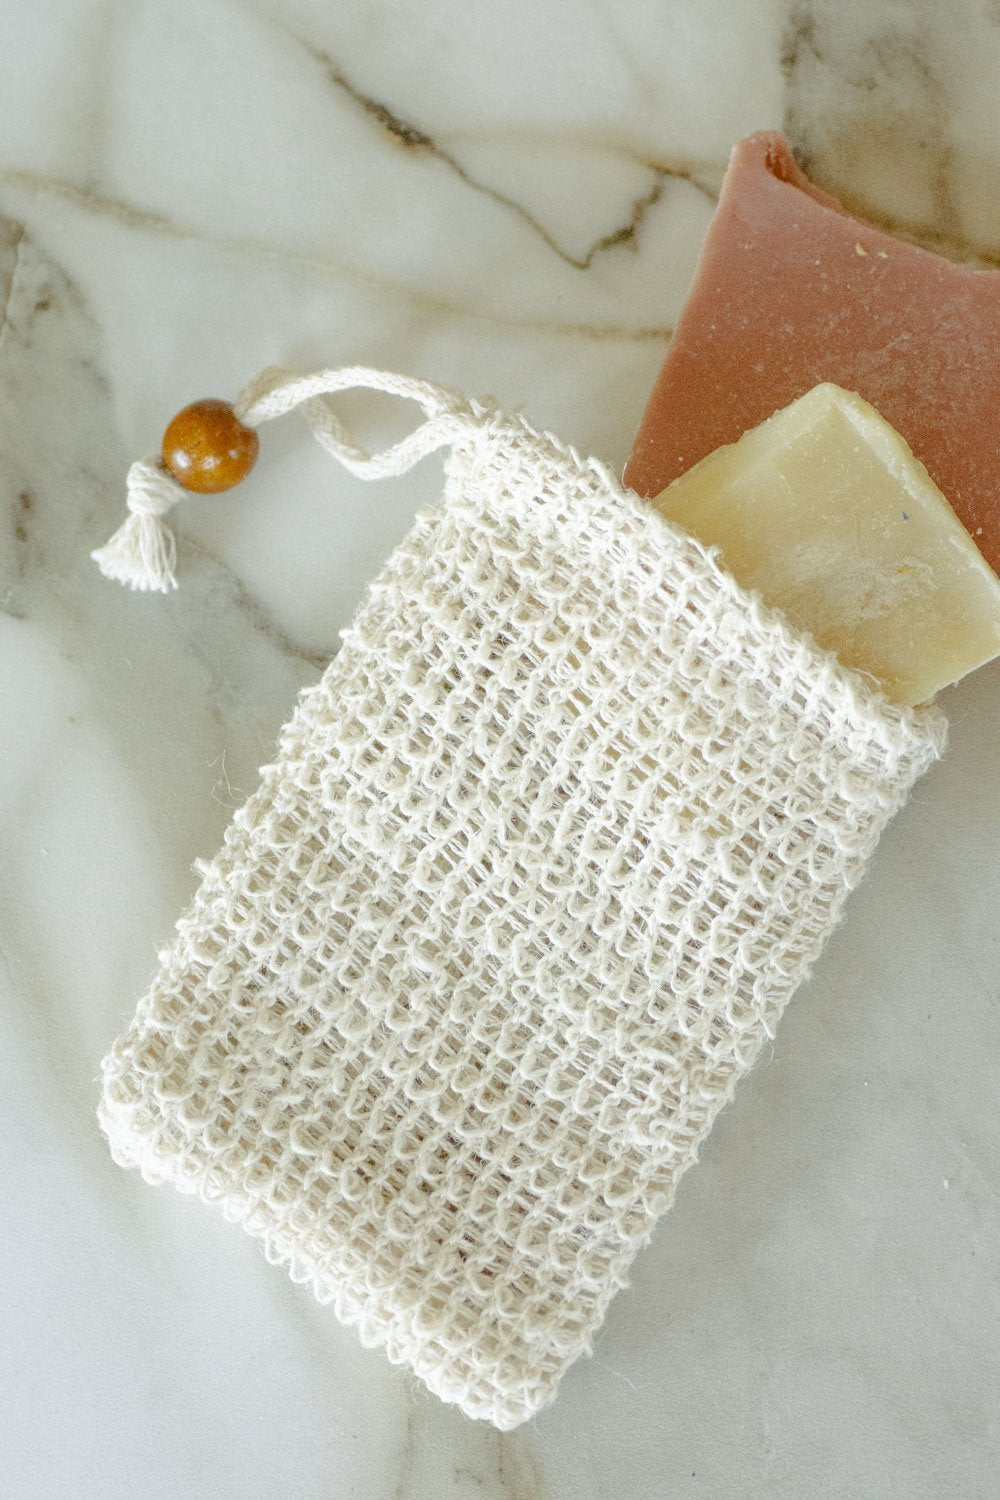 Agave Woven Soap Bag - Exfoliating Scrubber<br>No Tox Life